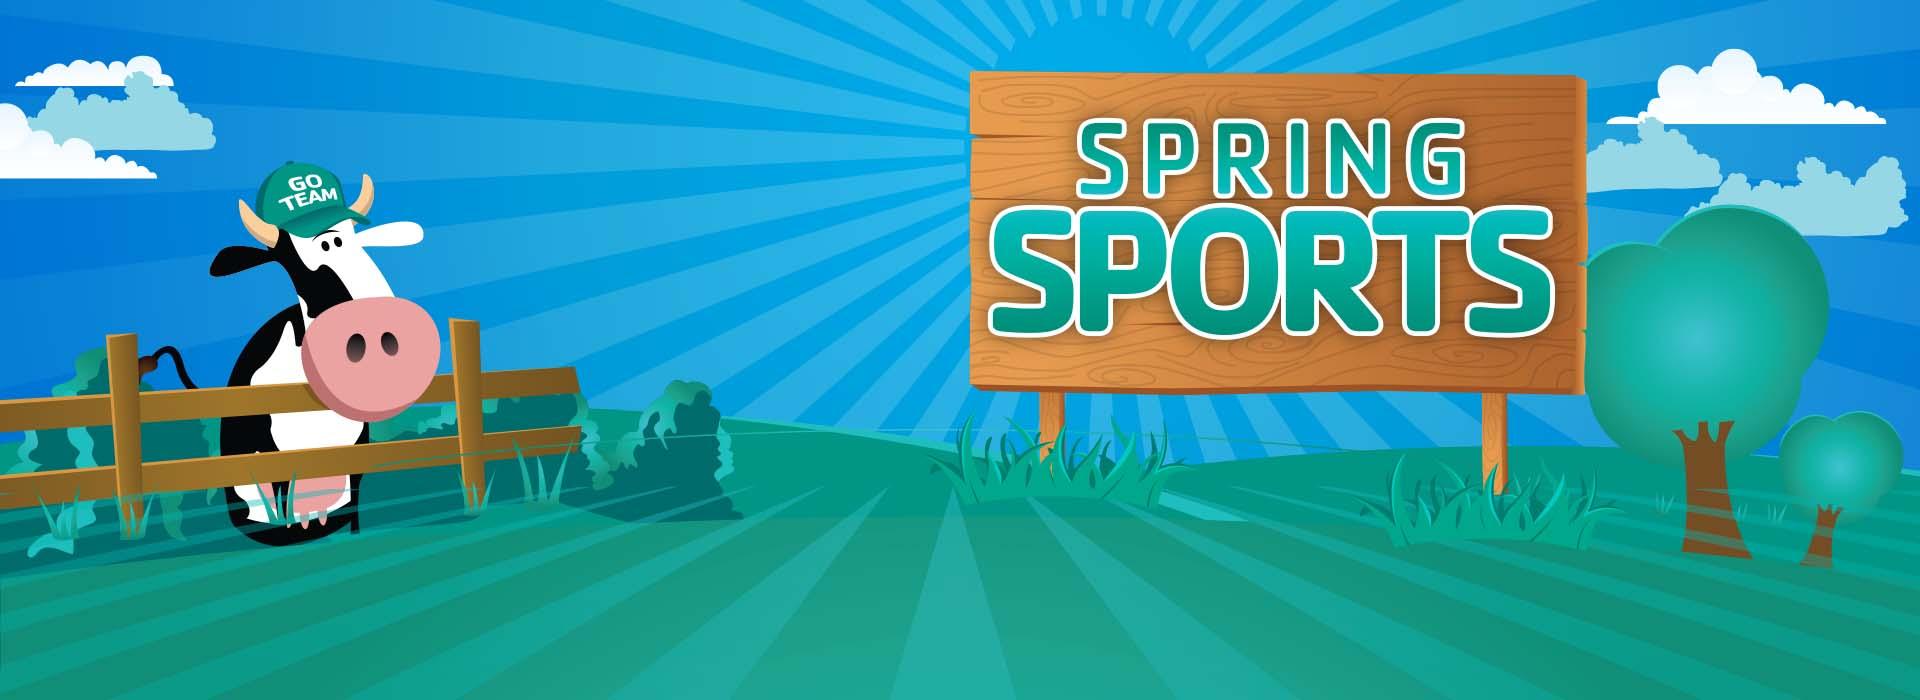 Springs Sports banner with a cow and a sign on a farm